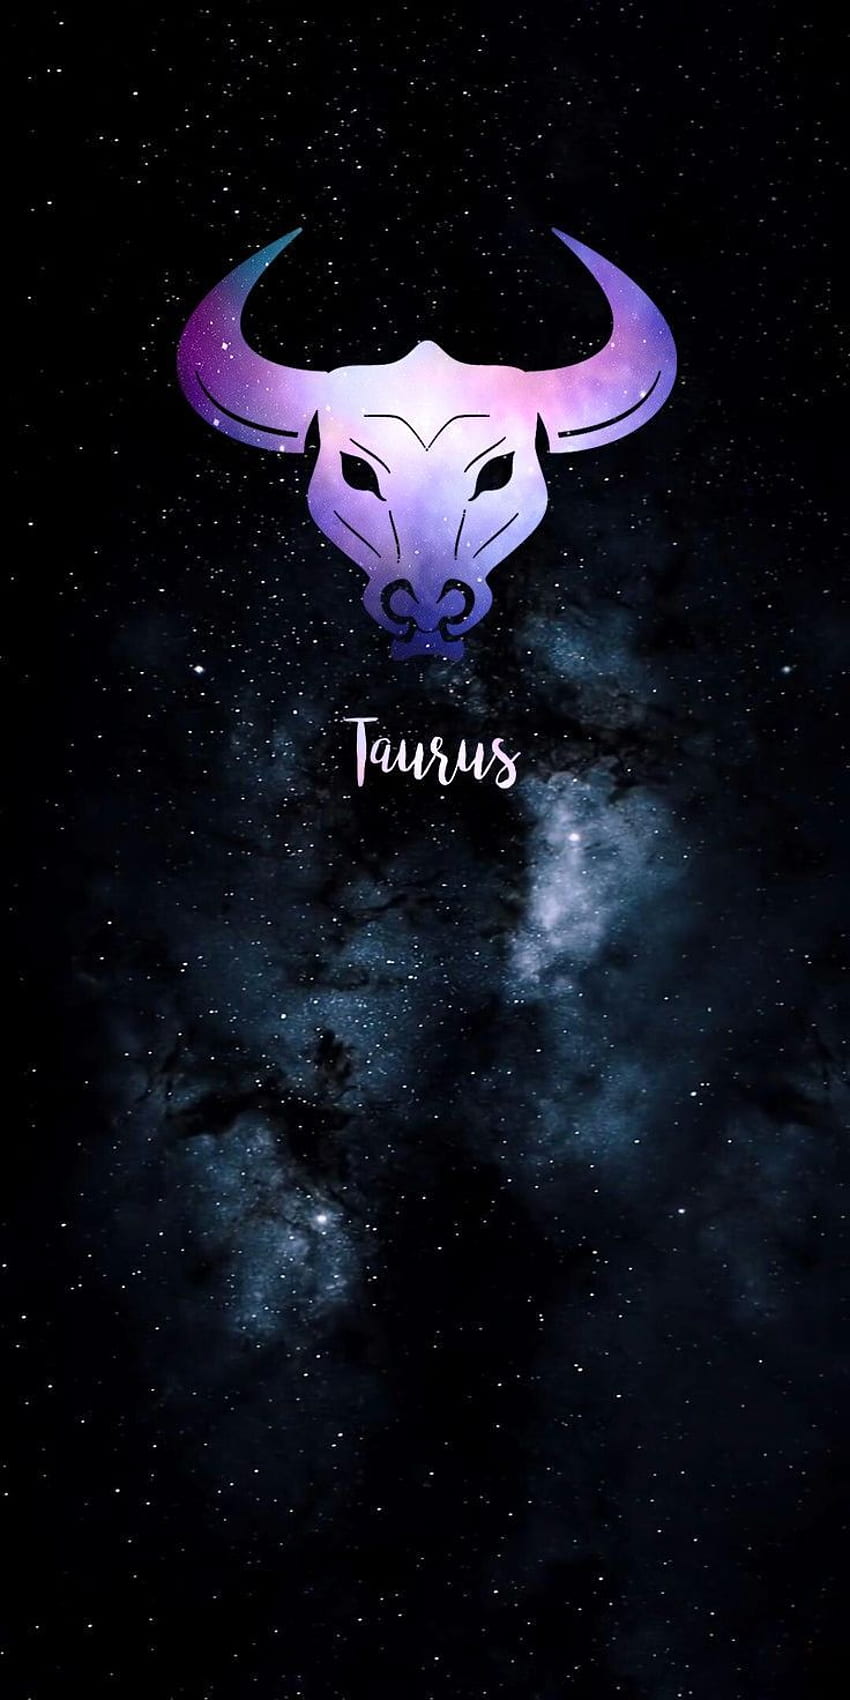 A taurus sign is shown on the wall - Taurus